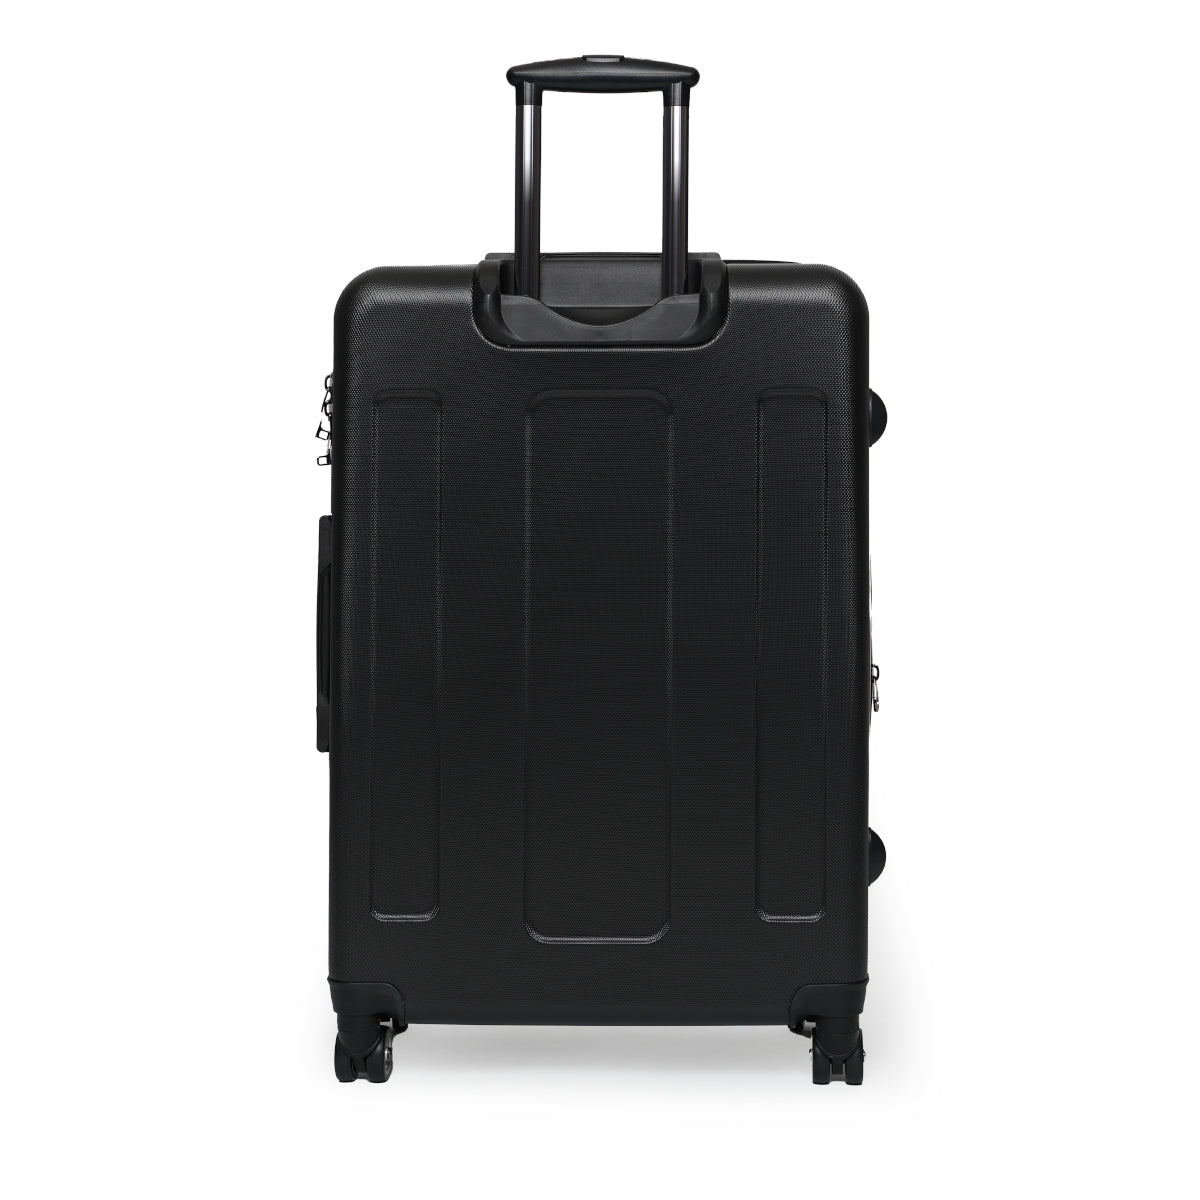 Kingdom Currency Cabin Suitcase